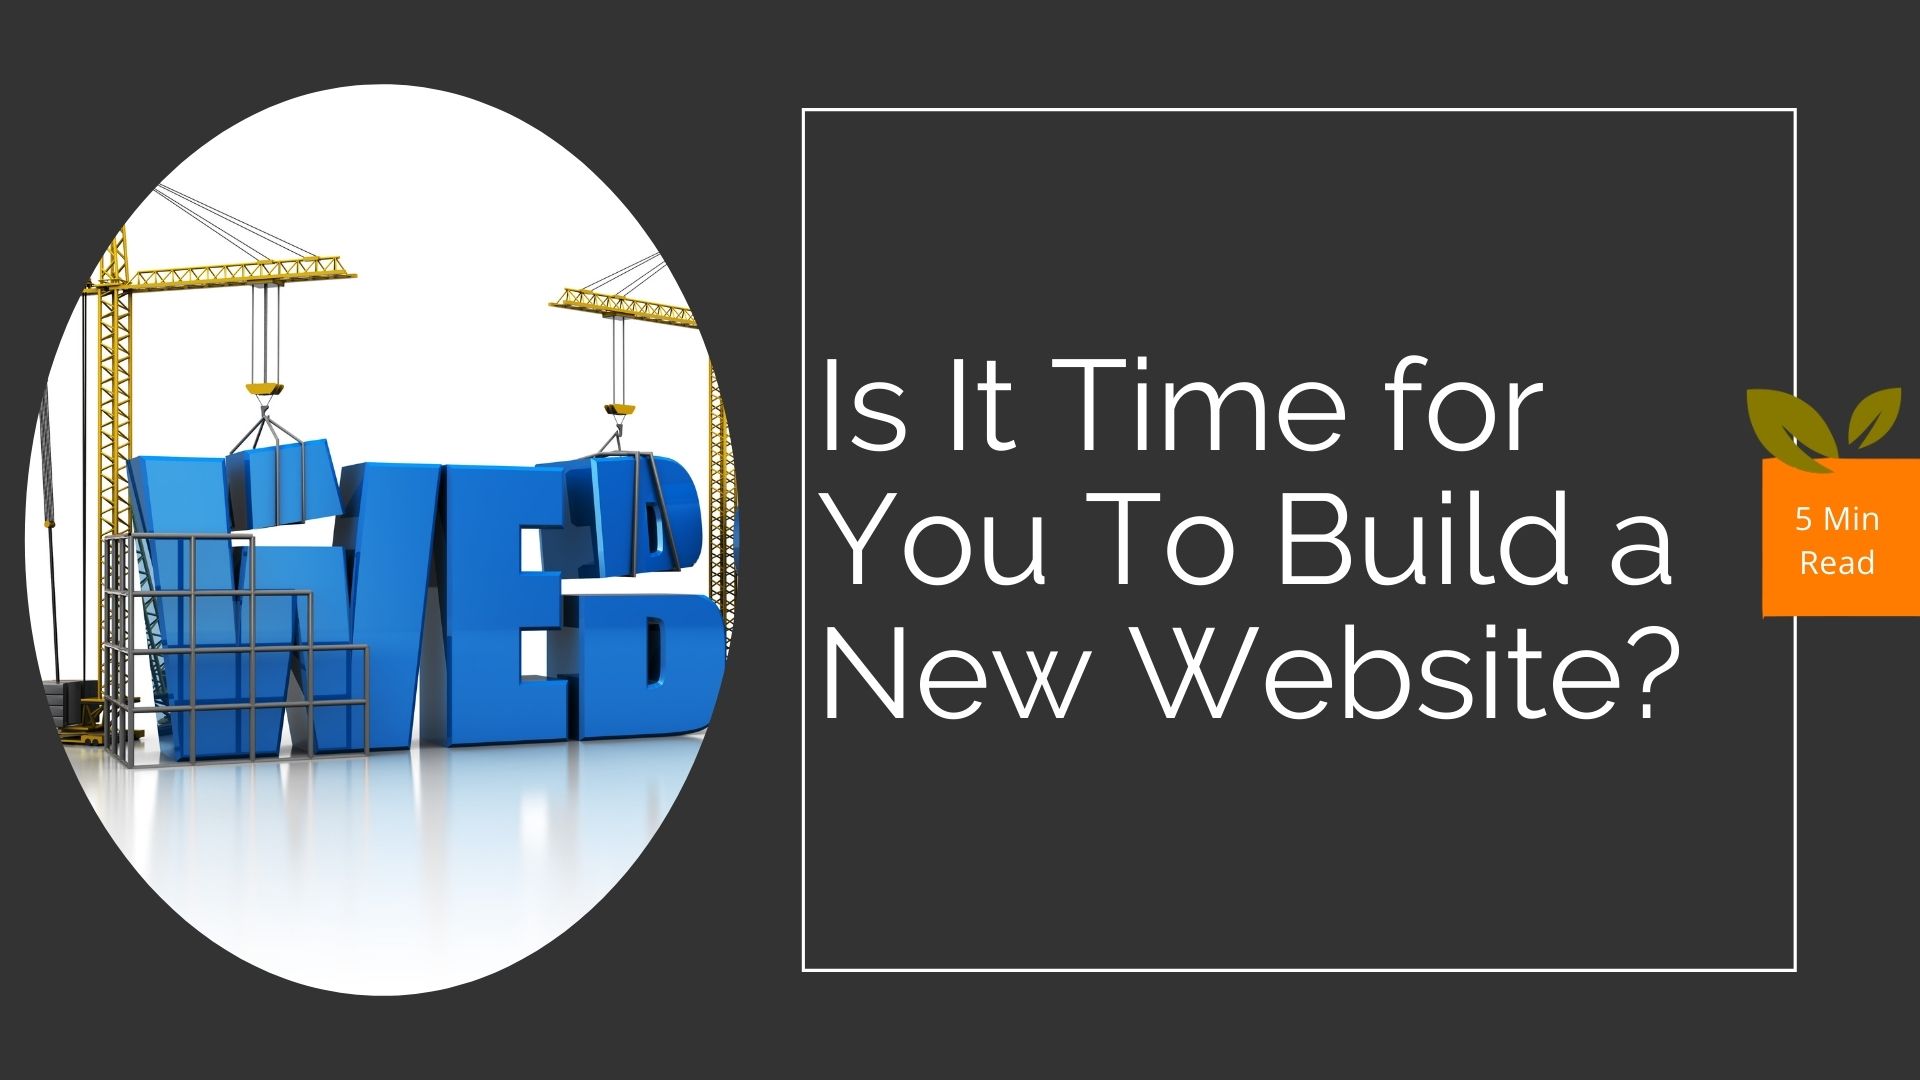 Reasons to build a new website